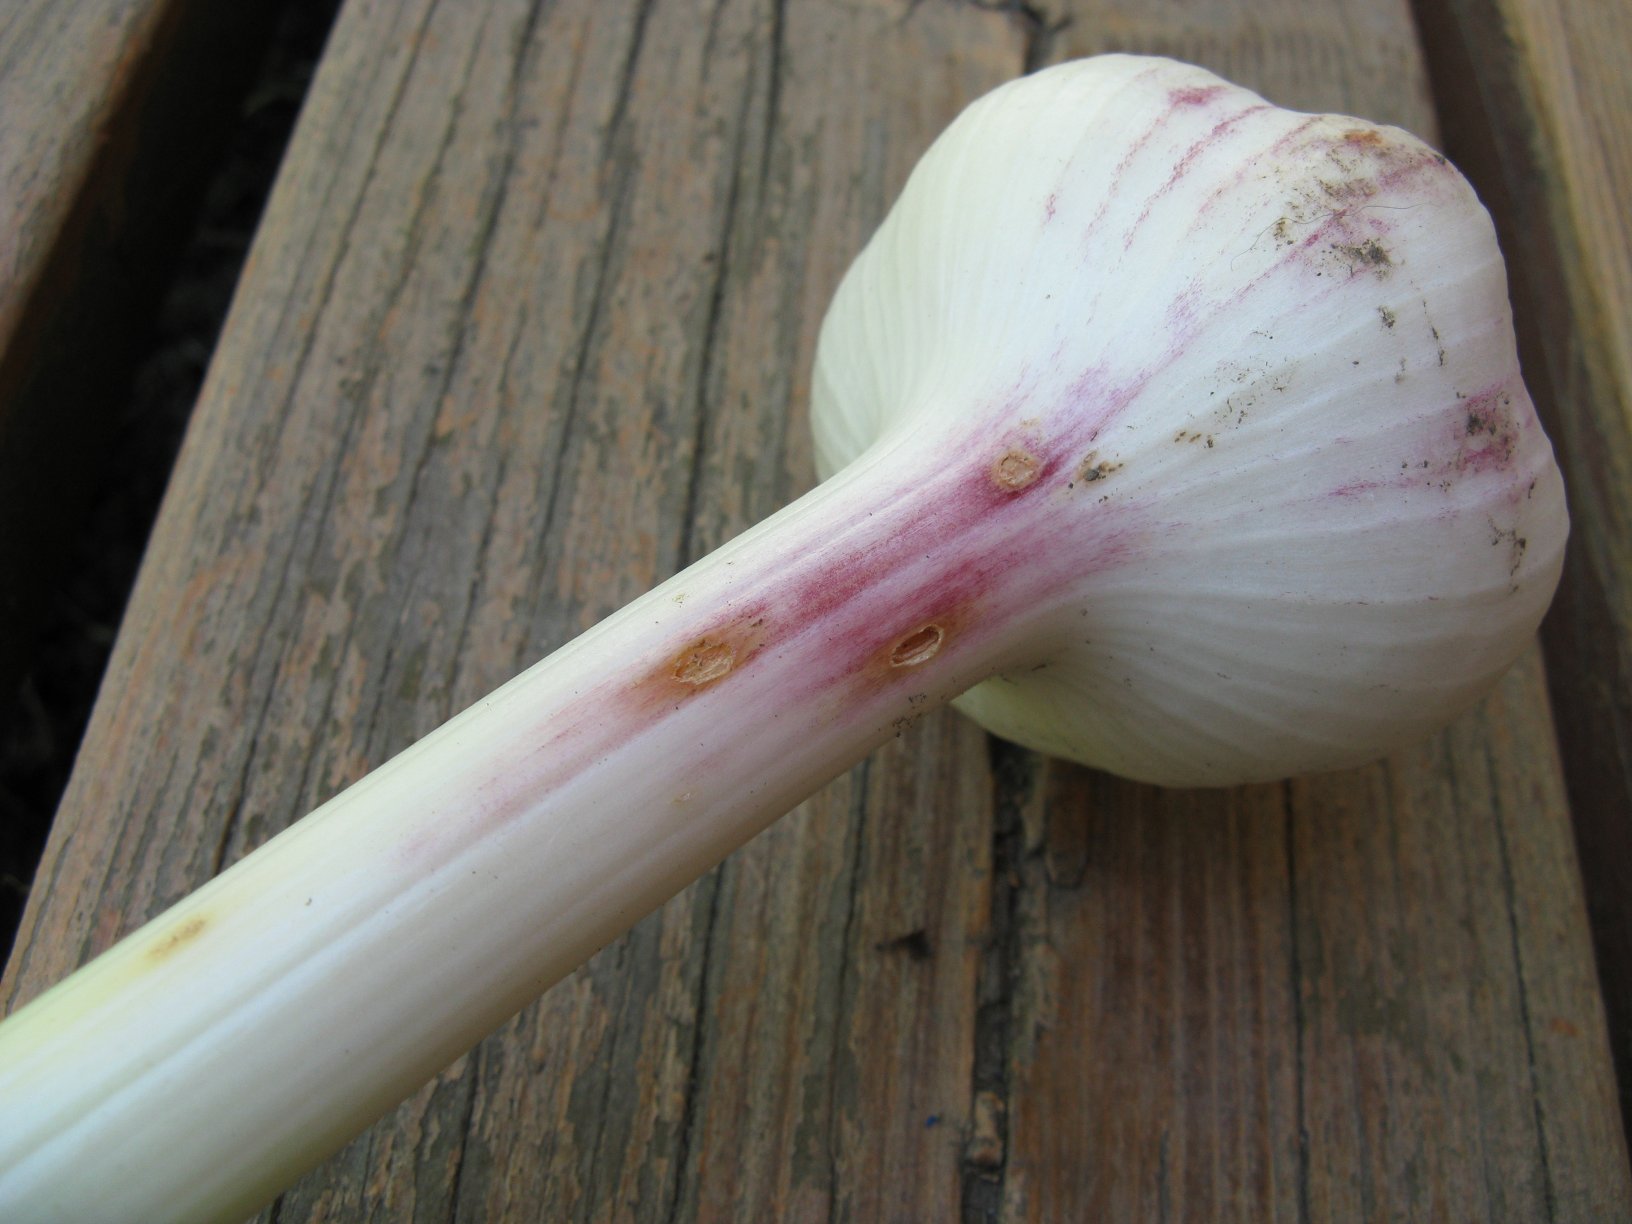 Garlic showing insect damage in bulb